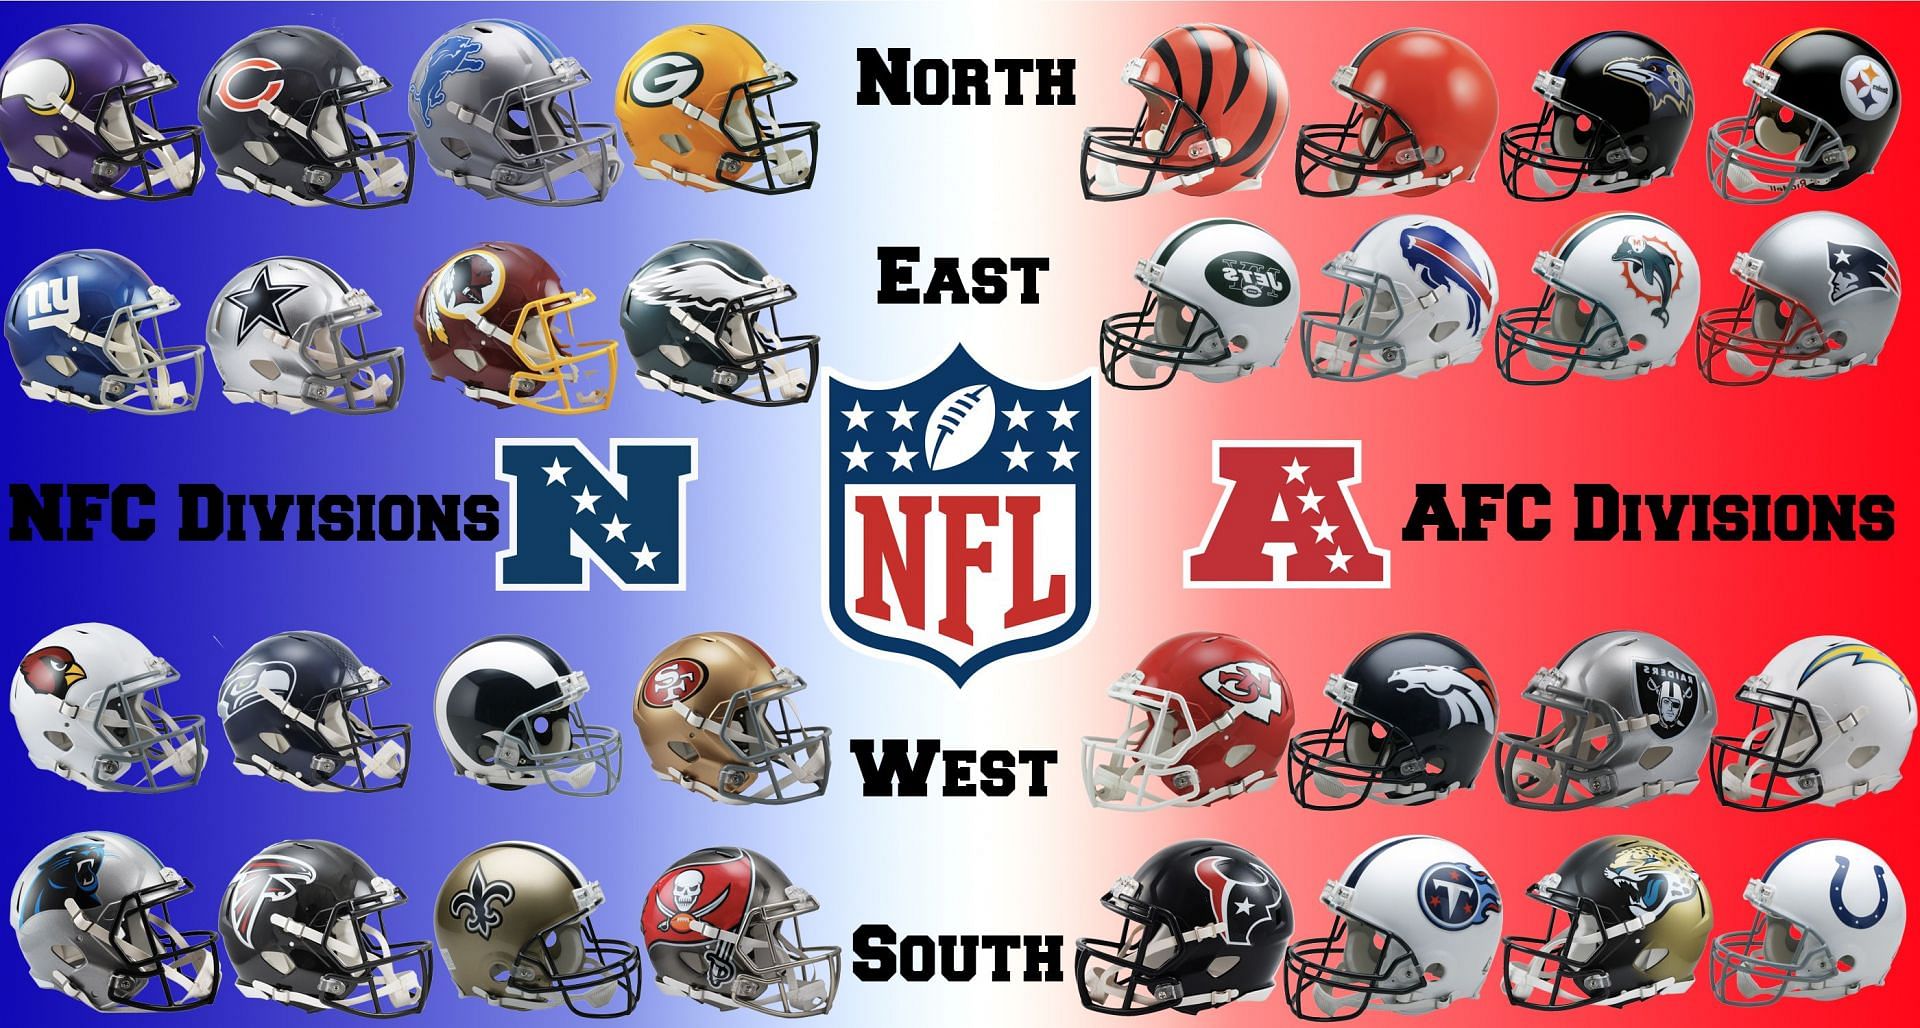 NFL Divisions ranked for 2022 season